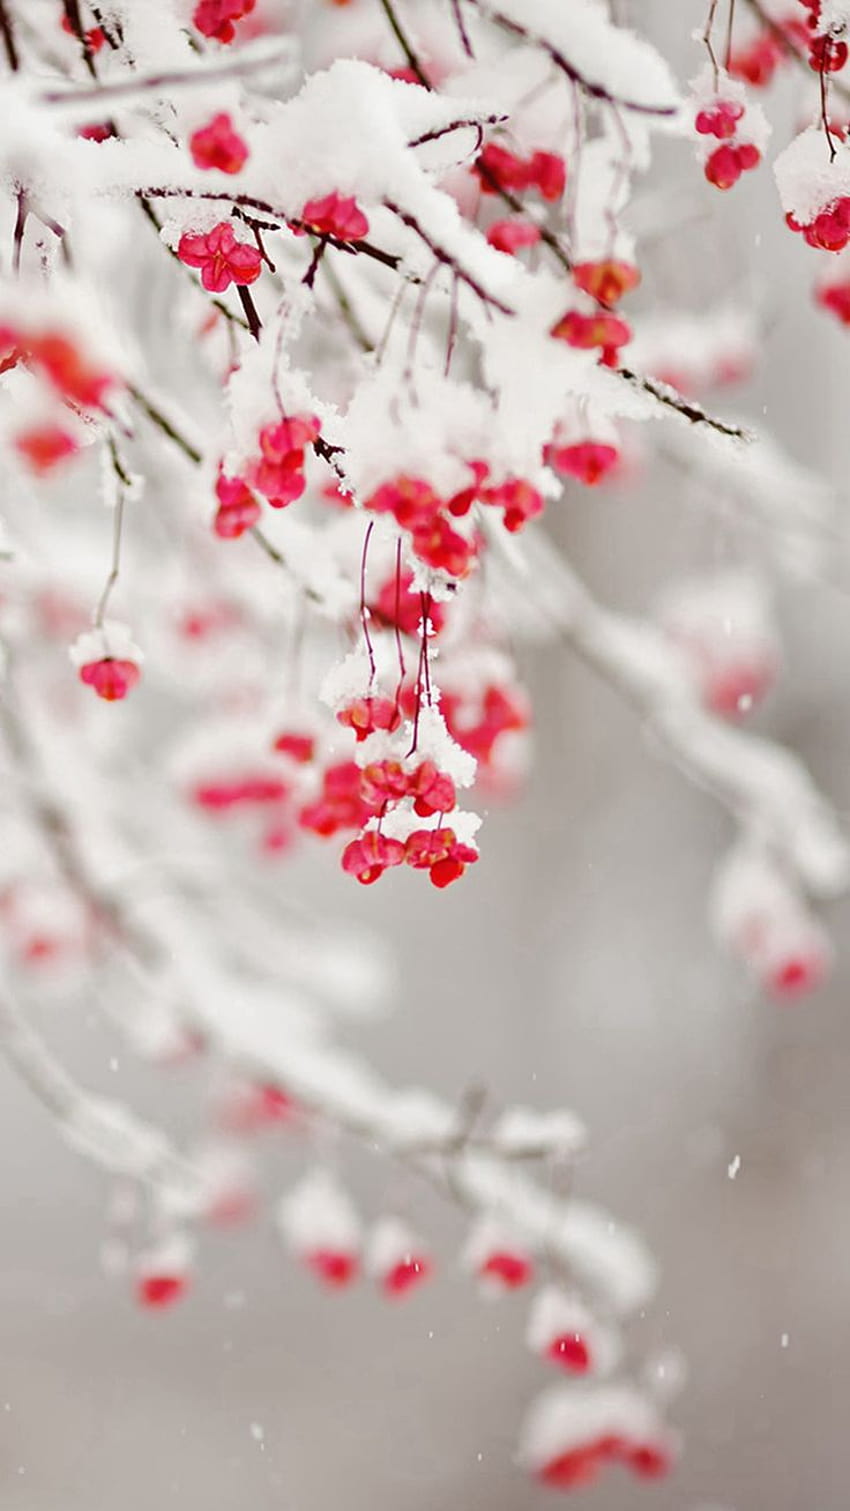 Winter Snowy Pure Icy Fruit Branch iPhone 6, cute winter iphone HD phone wallpaper